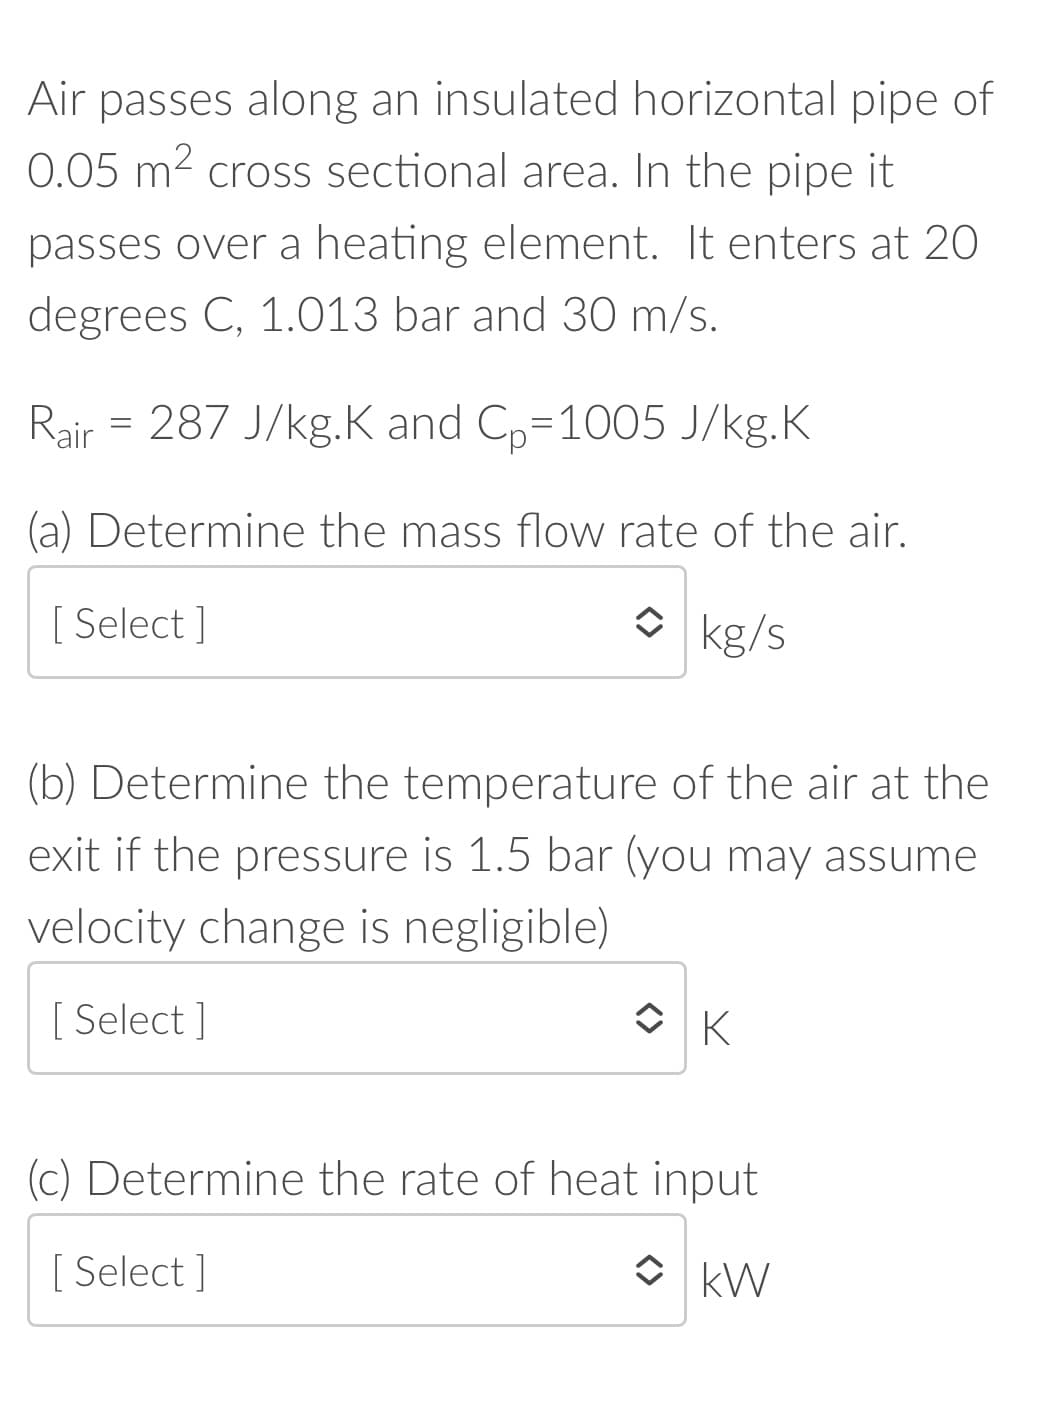 Air passes along an insulated horizontal pipe of
0.05 m2 cross sectional area. In the pipe it
passes over a heating element. It enters at 20
degrees C, 1.013 bar and 30 m/s.
Rair = 287 J/kg.K and Cp=1005 J/kg.K
(a) Determine the mass flow rate of the air.
[ Select ]
O kg/s
(b) Determine the temperature of the air at the
exit if the pressure is 1.5 bar (you may assume
velocity change is negligible)
[ Select ]
(c) Determine the rate of heat input
[ Select ]
O kW
